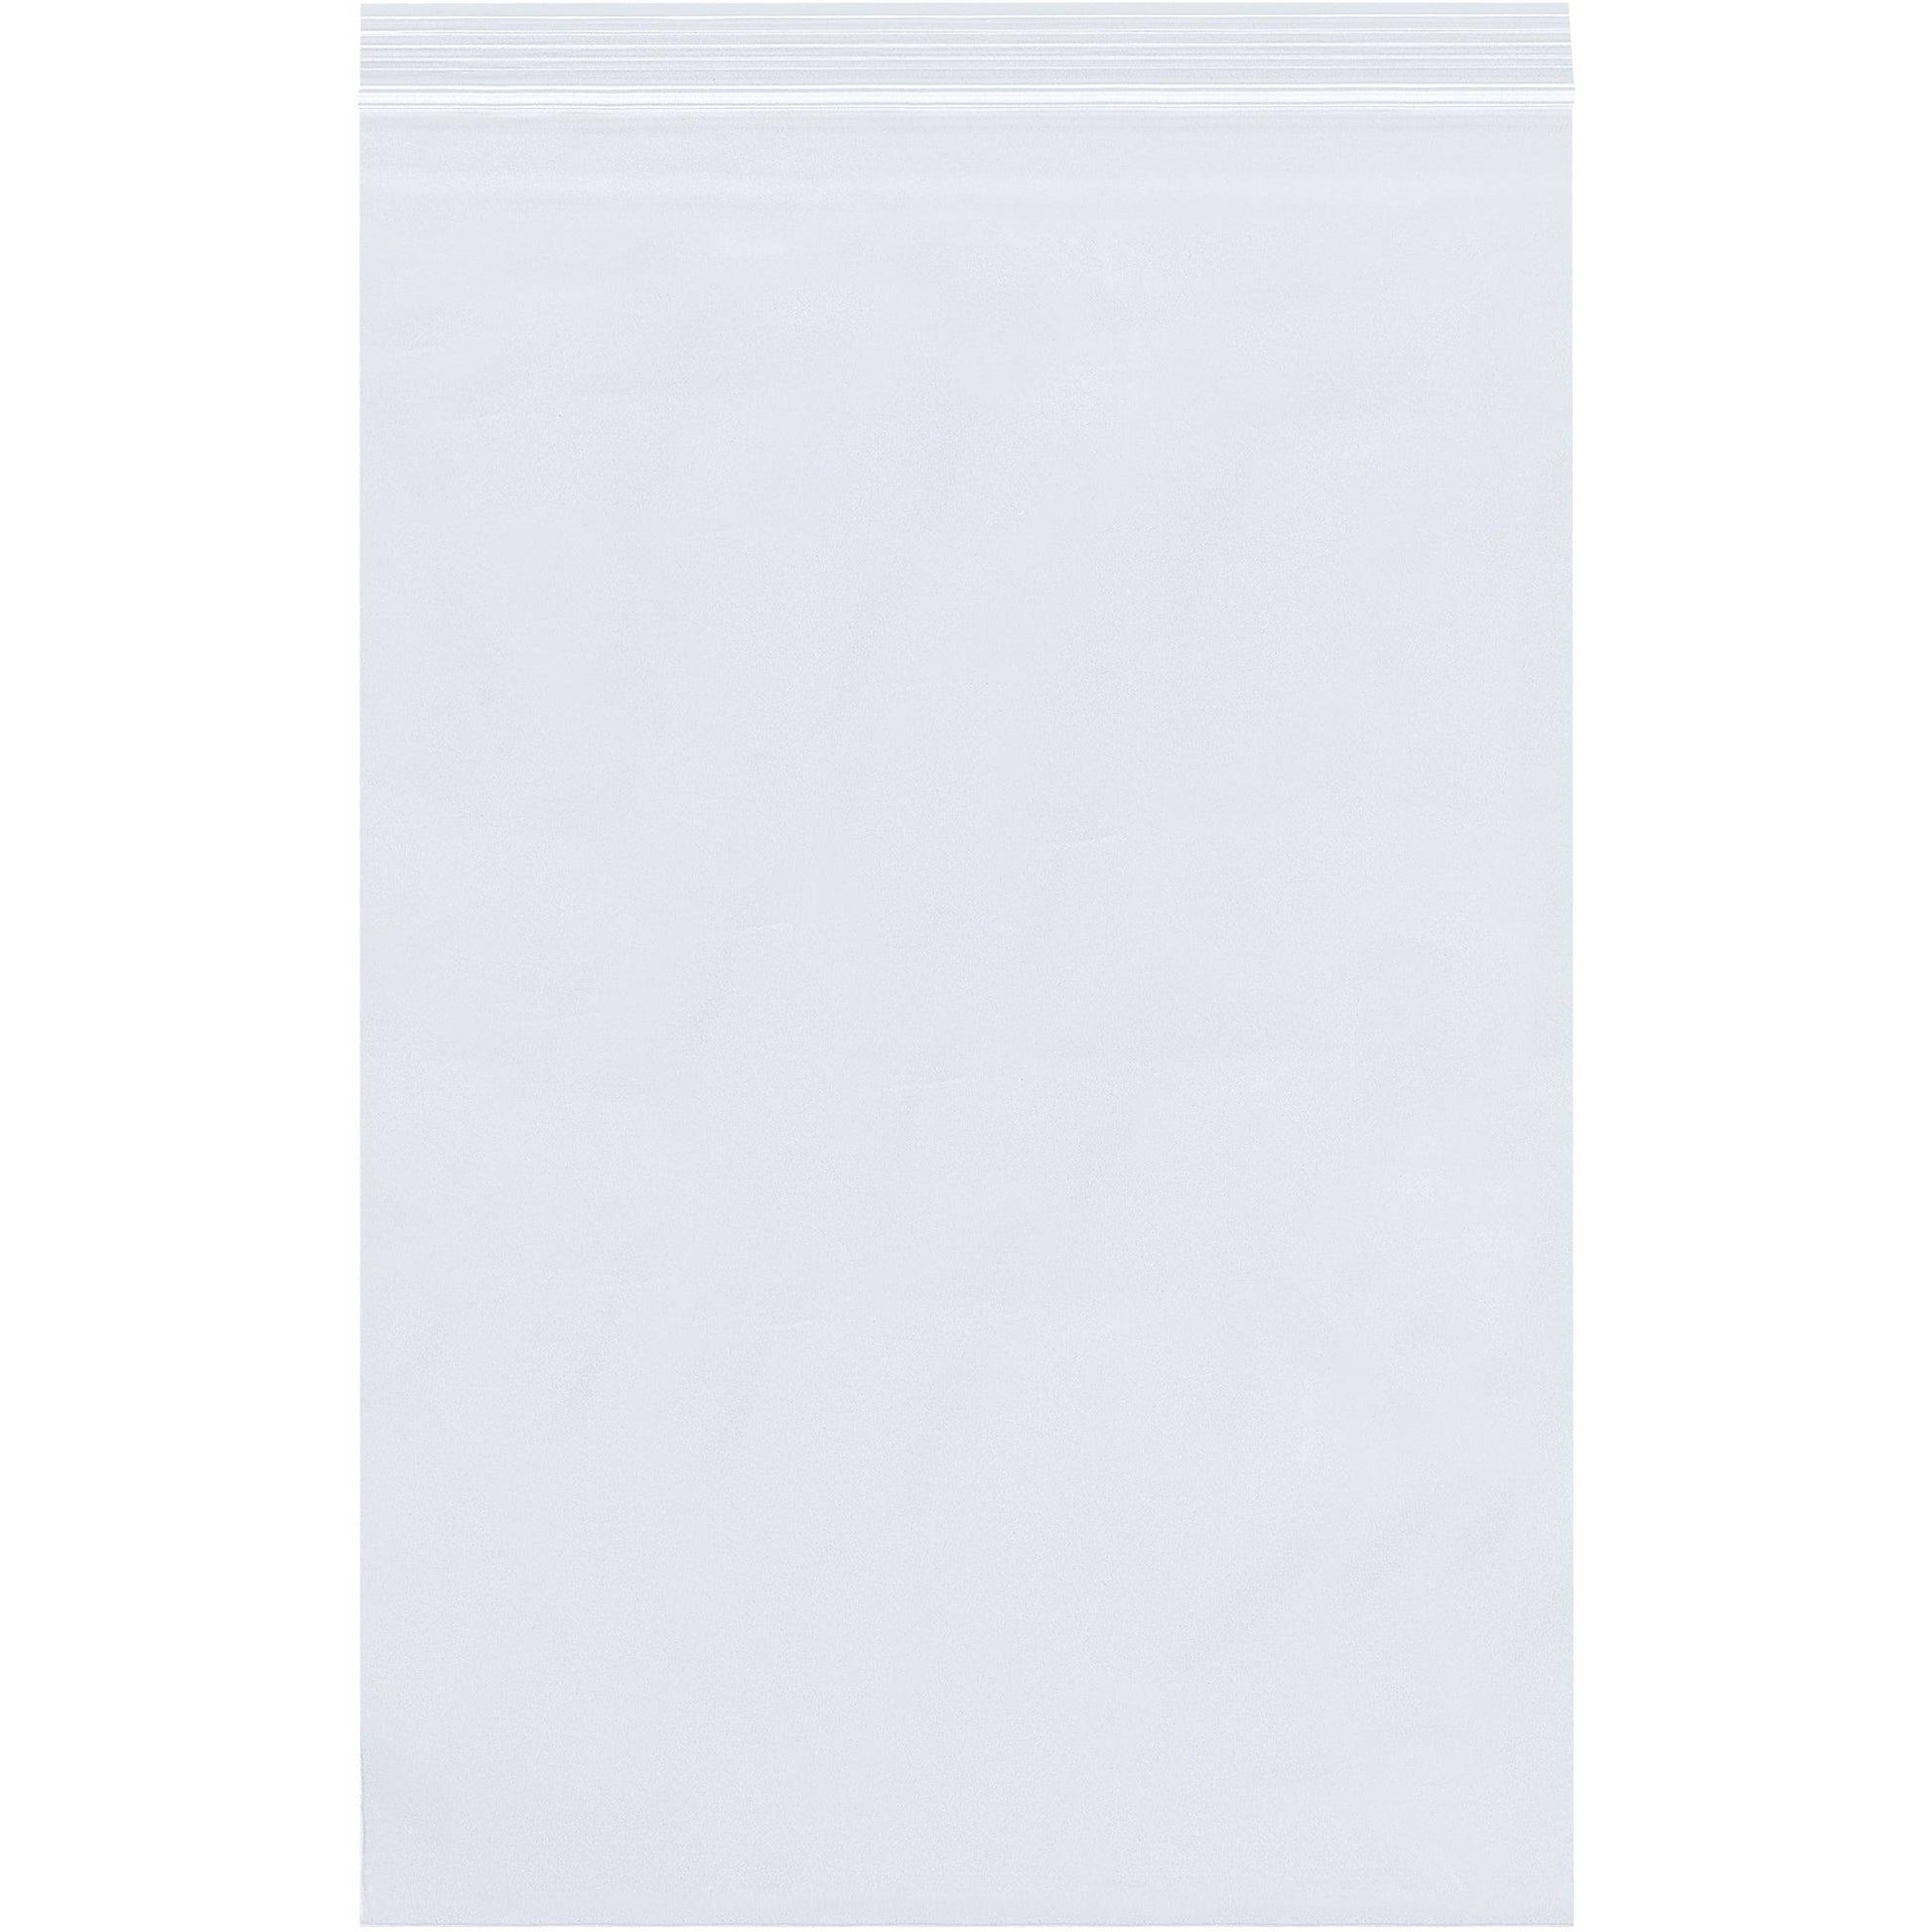 4 x 12" - 6 Mil Reclosable Poly Bags - PB4258